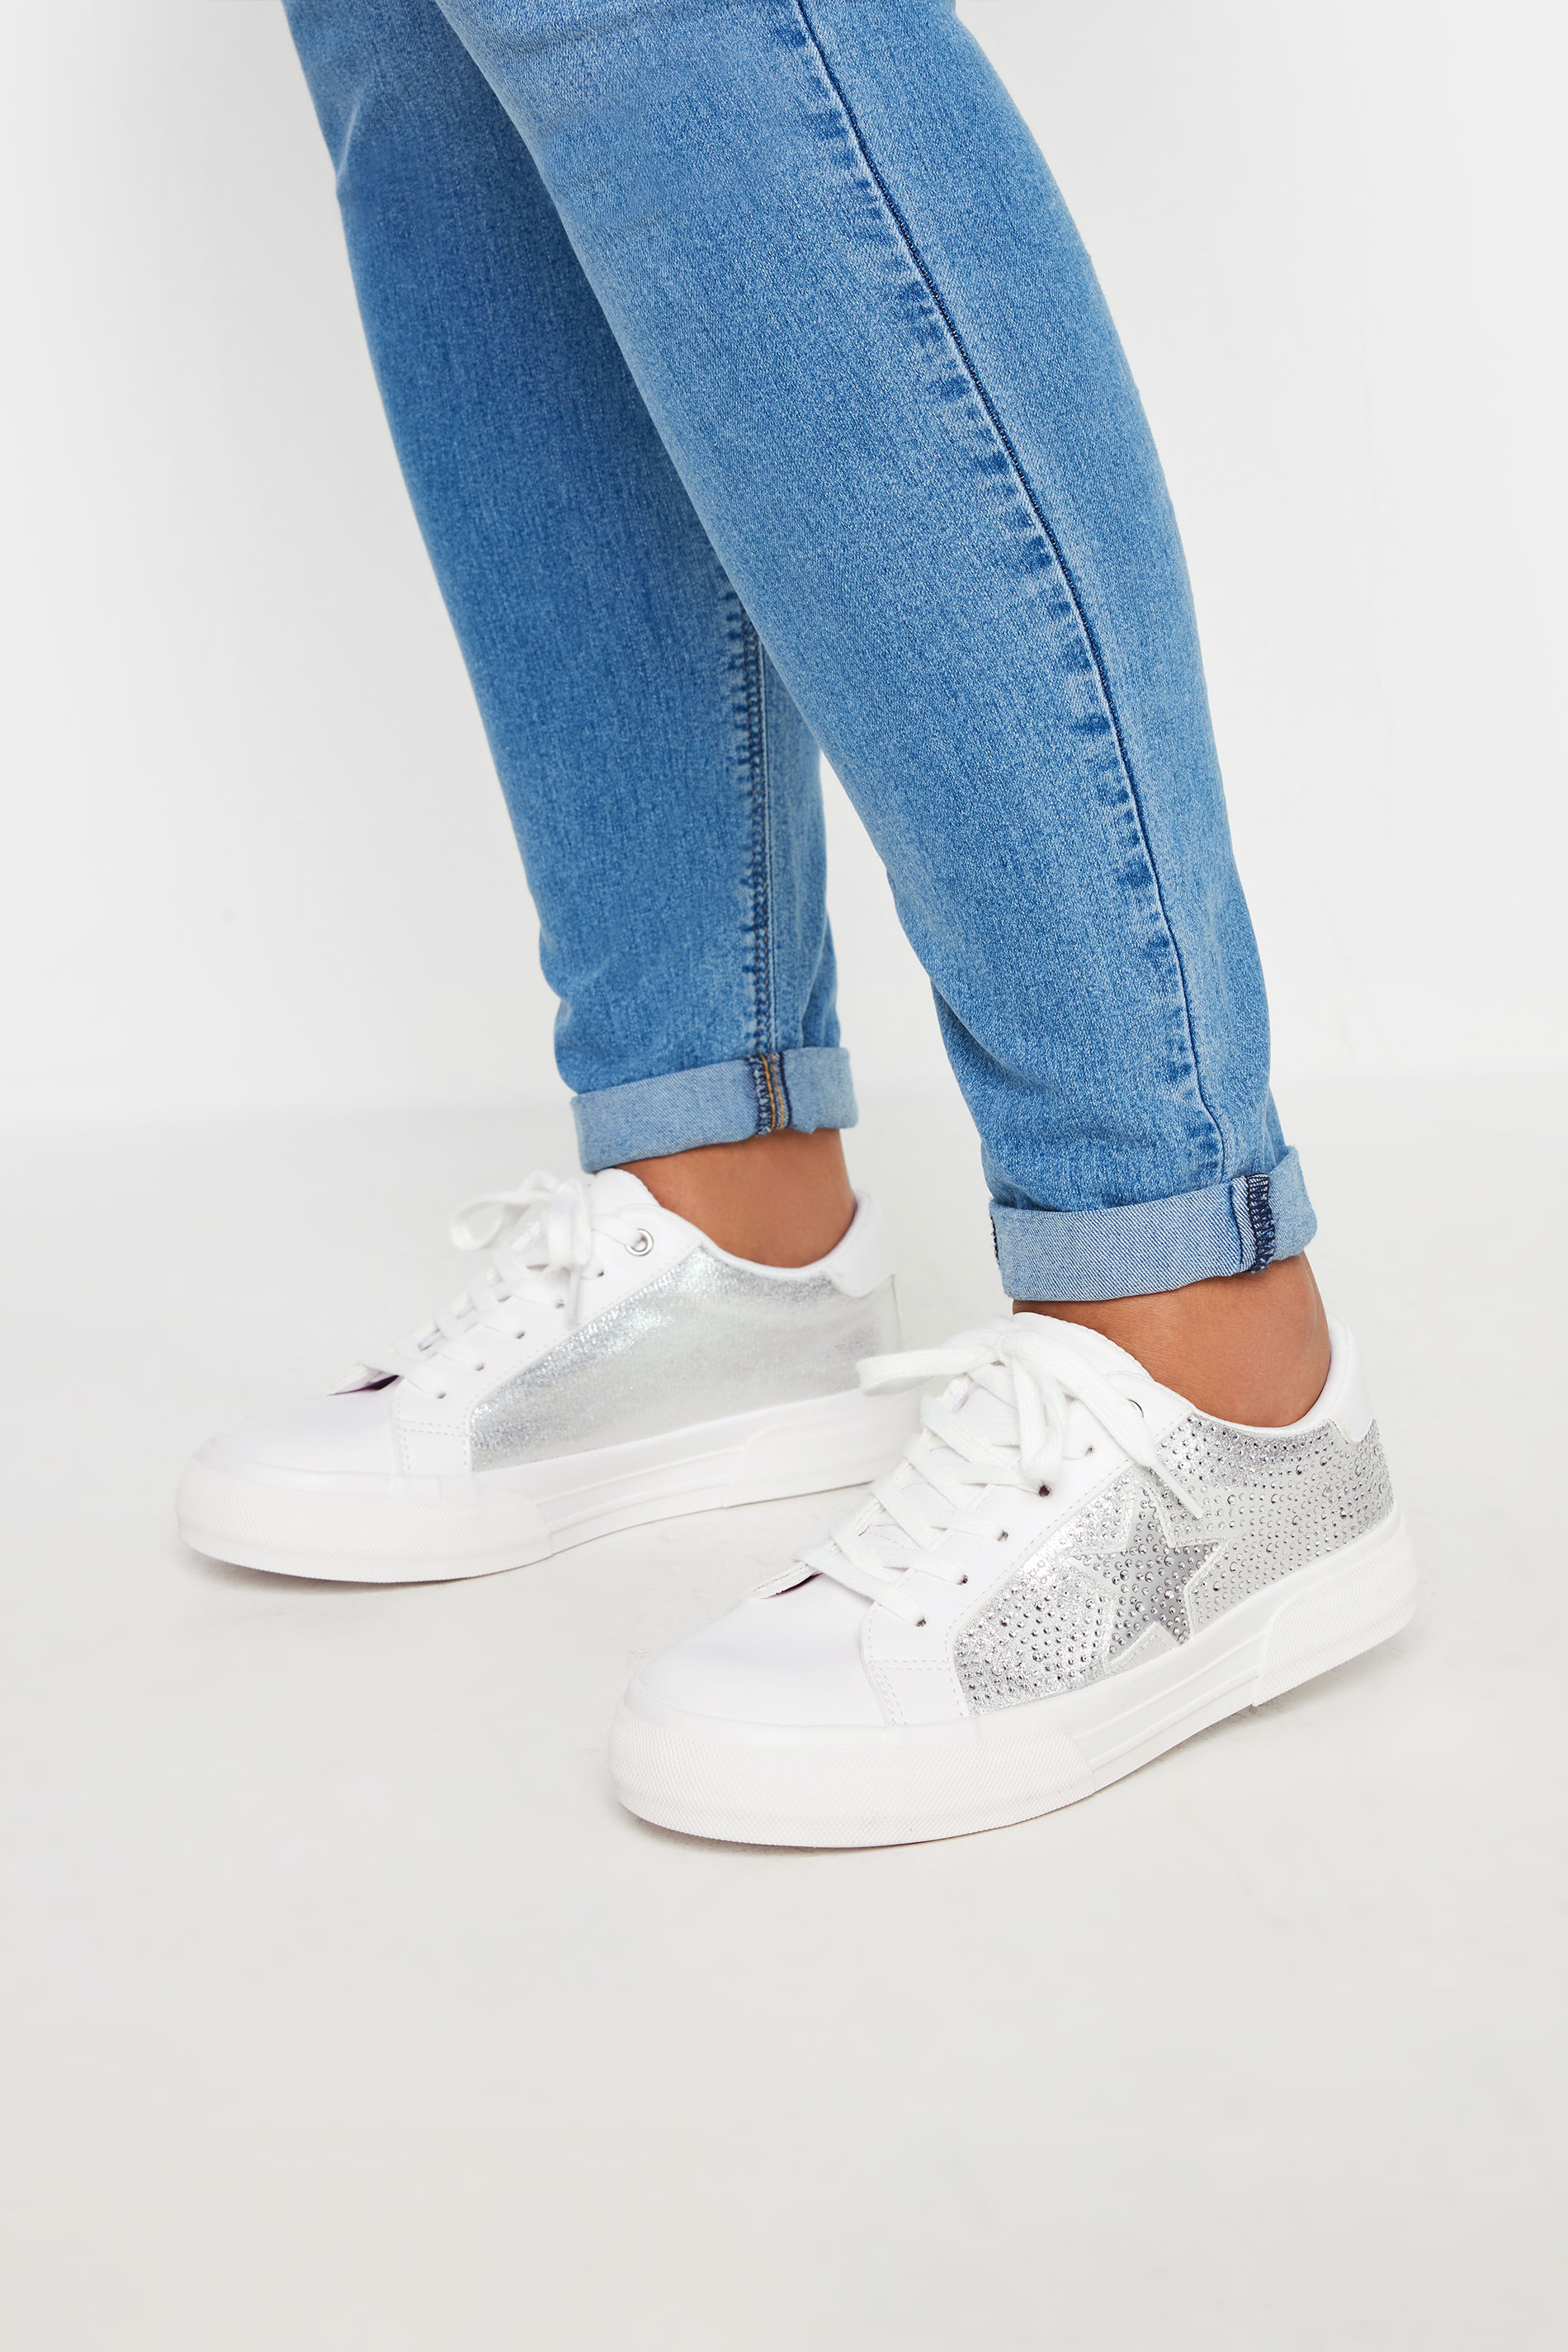 White Diamante Star Trainers In Extra Wide EEE Fit | Yours Clothing 1